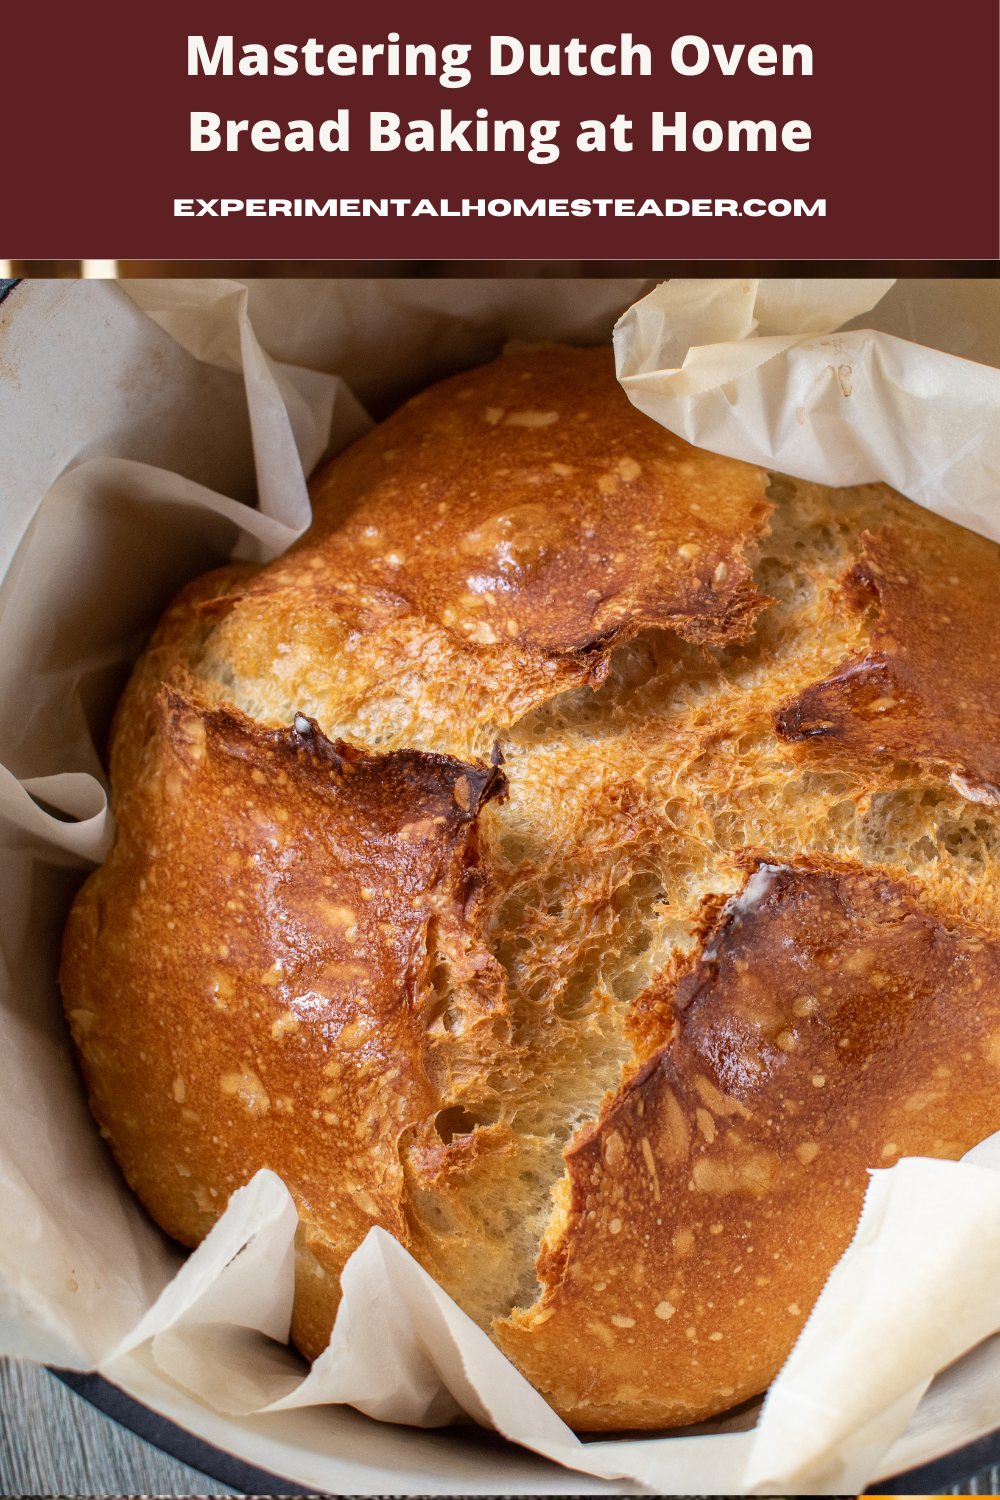 A baked loaf of bread in an enamel cast iron Dutch Oven with parchment paper underneath the bread.